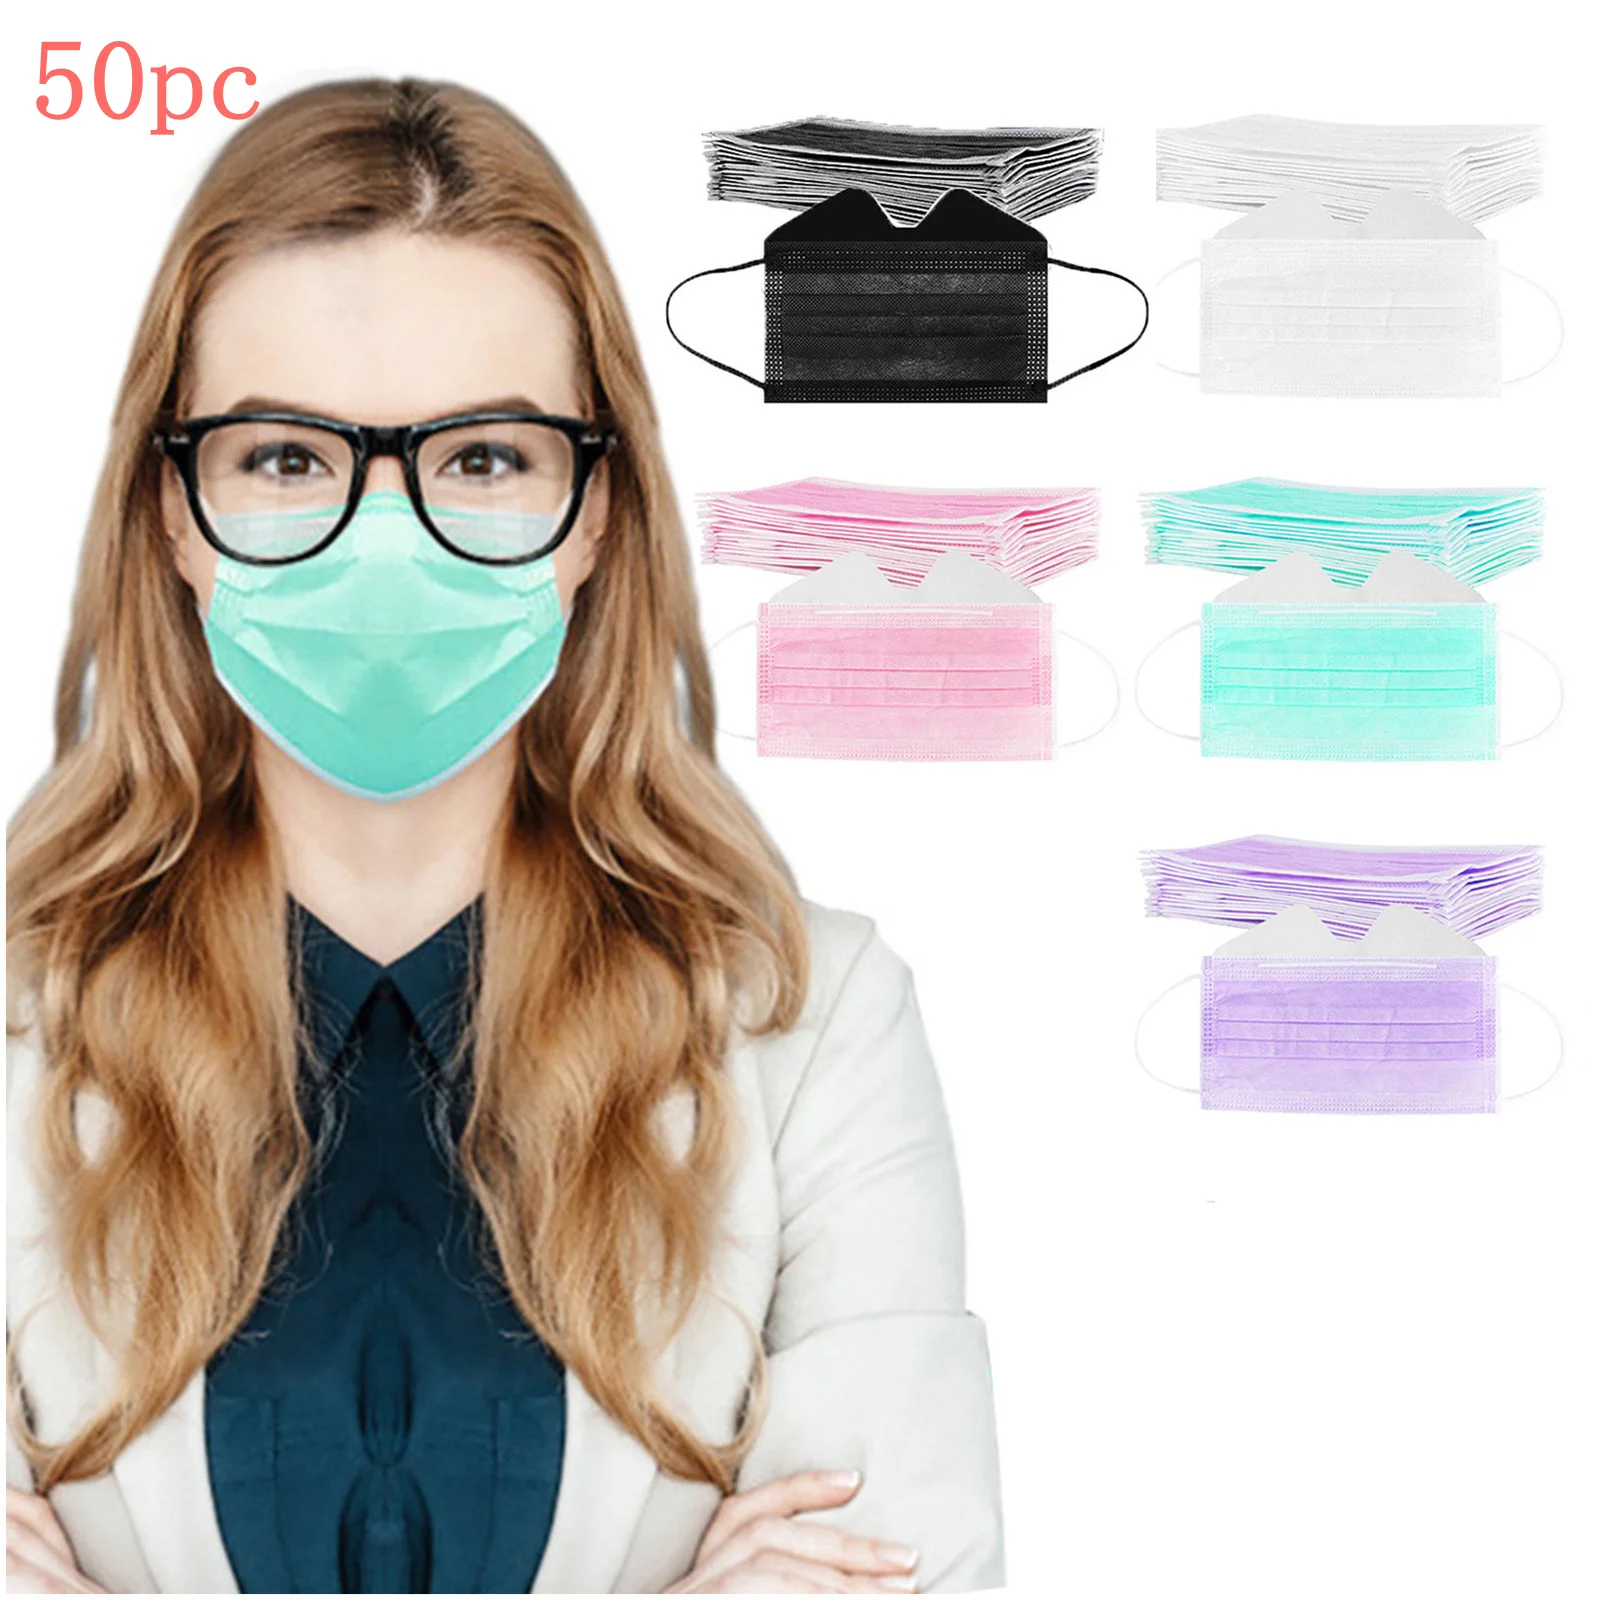 

Disposable Face Masks Anti-fog 3-ply Disposable Mask 50pc Anti-pollution Filter Mouth Mask Outdoor Protective Halloween Cosplay